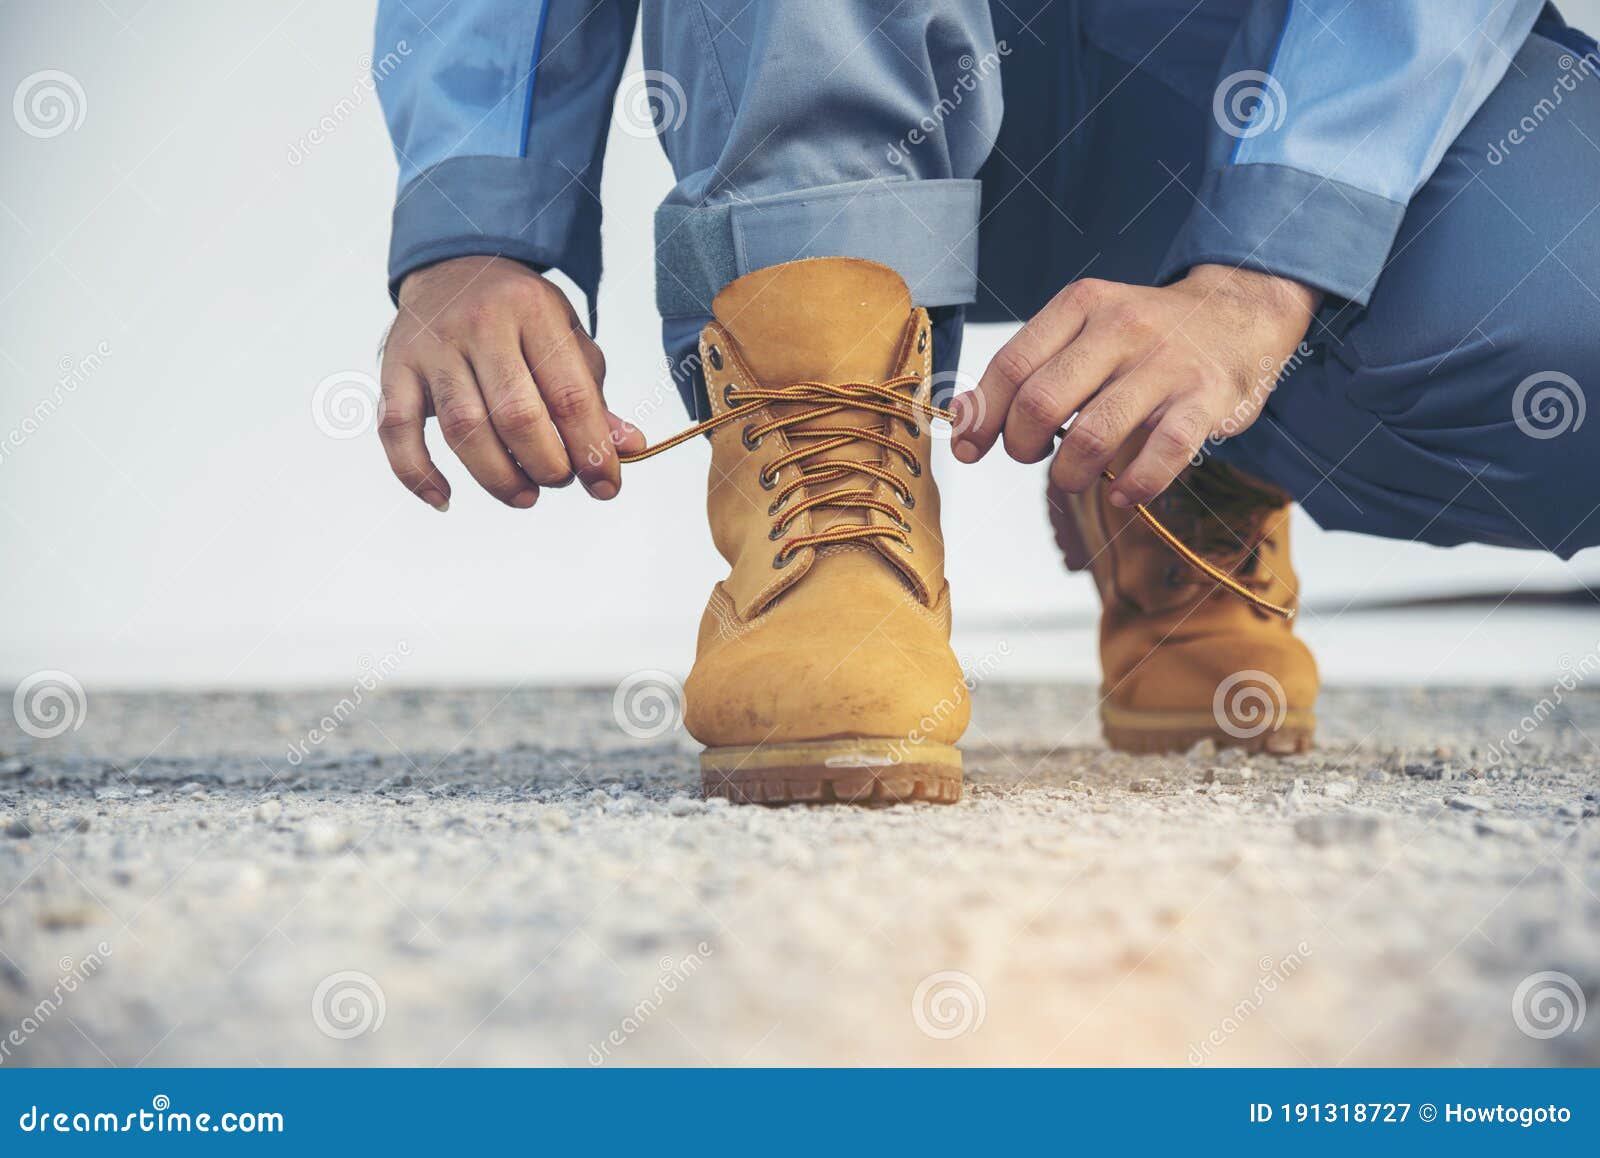 Man Kneel Down and Tie Shoes Industry Boots for Worker. Close Up Shot ...